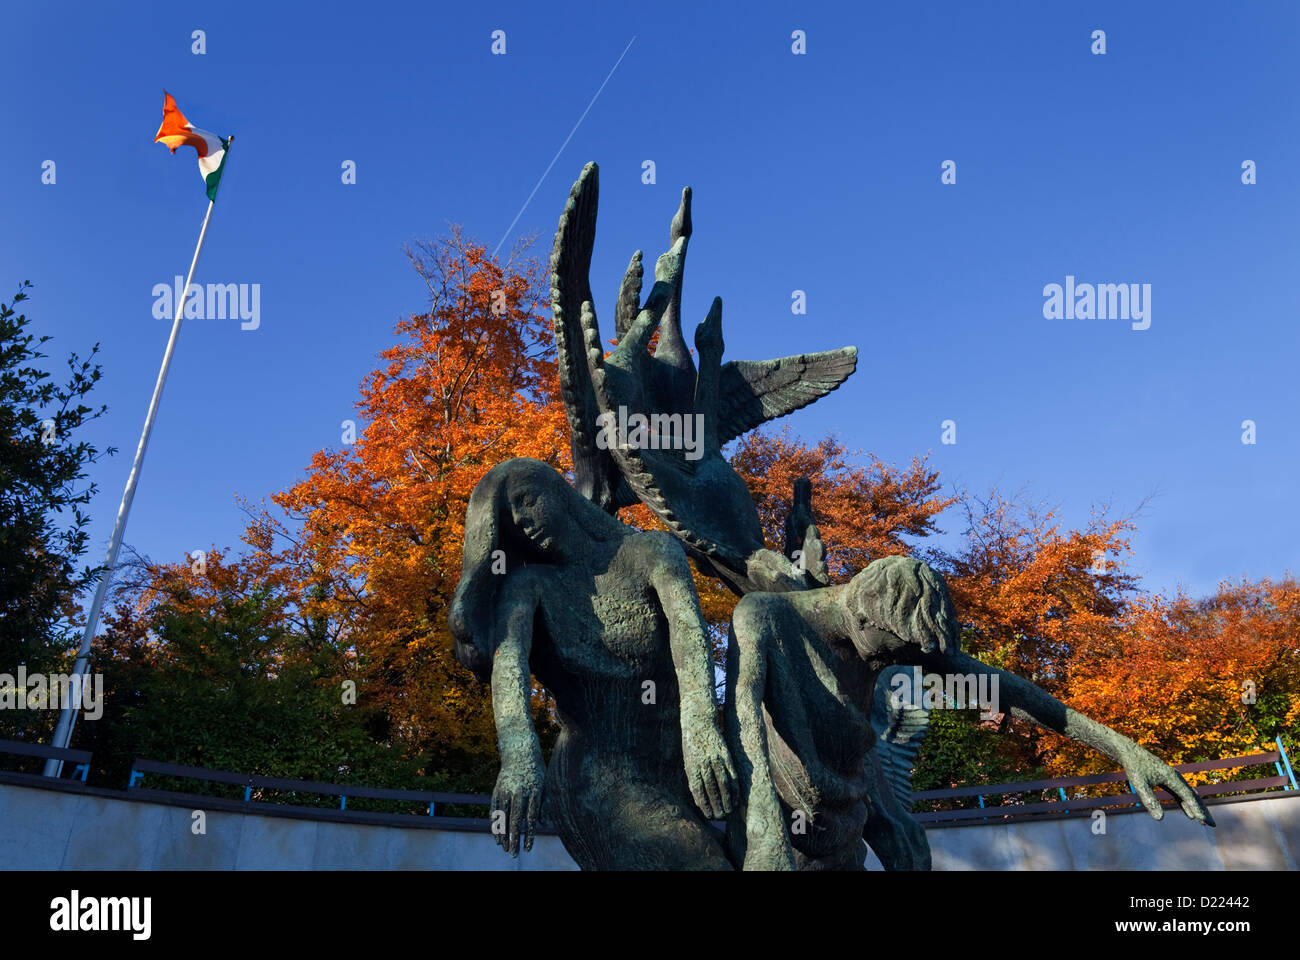 Sculpture of the Children of Lir by Oisín Kelly, Garden of Remembrance, Parnell Square, Dublin City, Ireland Stock Photo